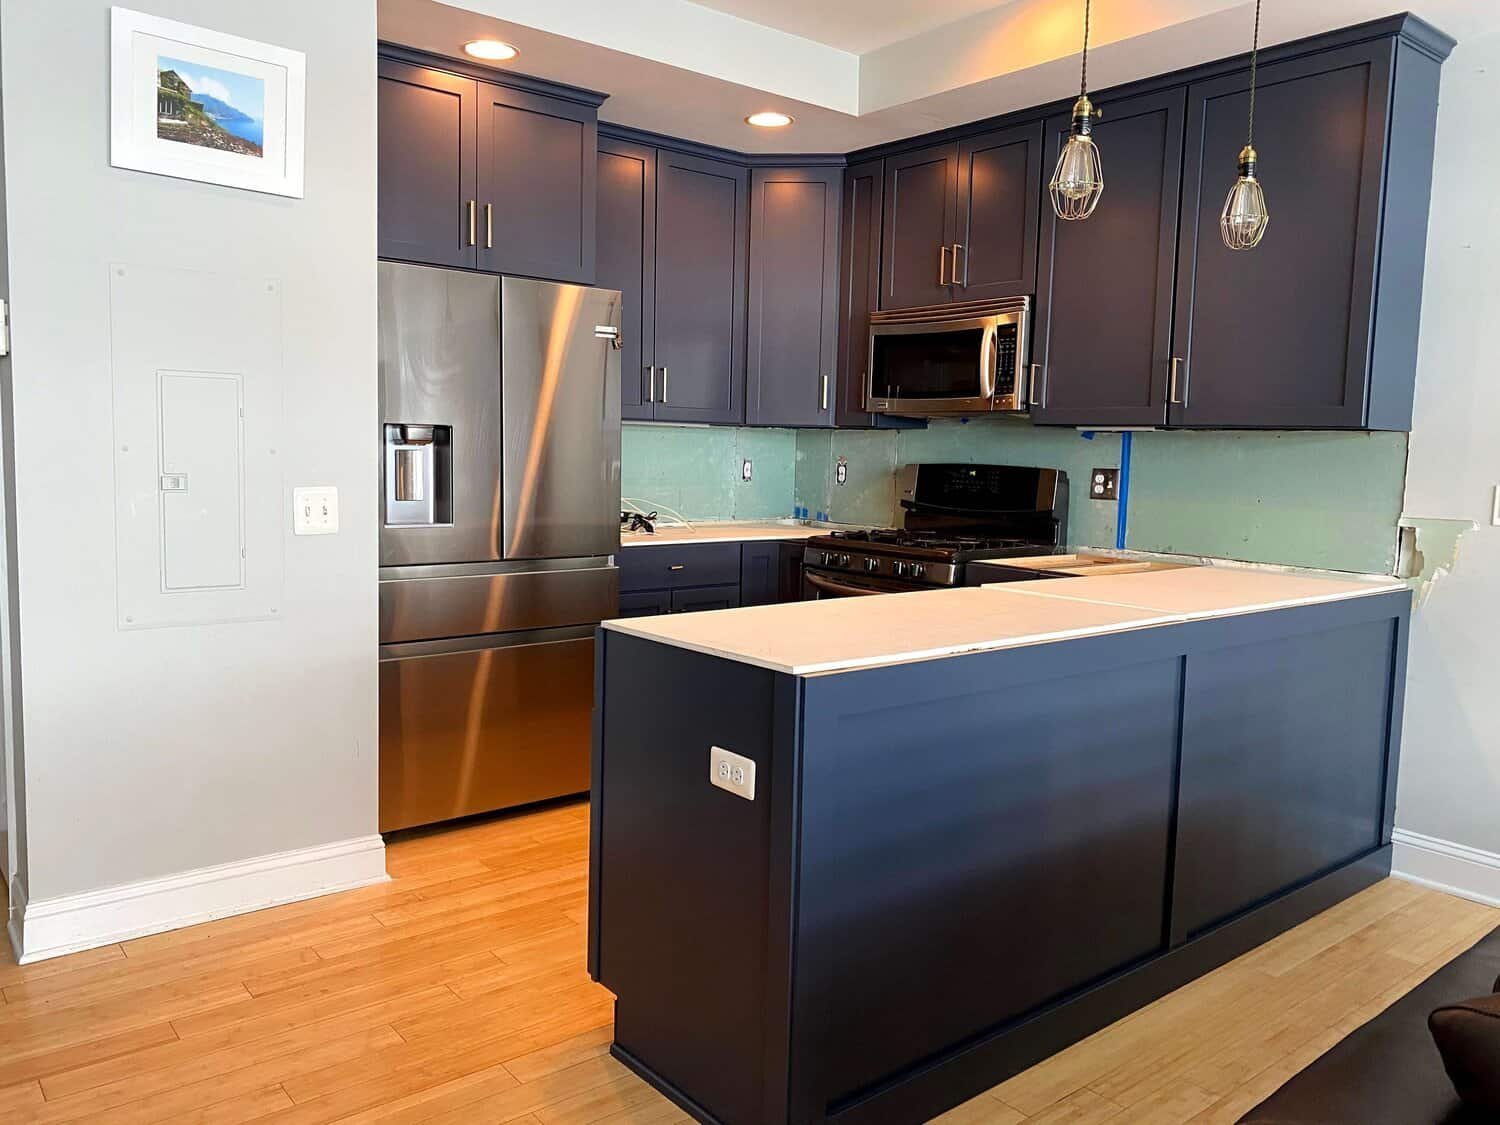 Kitchen with dark blue cabinets, stainless steel appliances, and pendant lighting over a partially finished countertop.